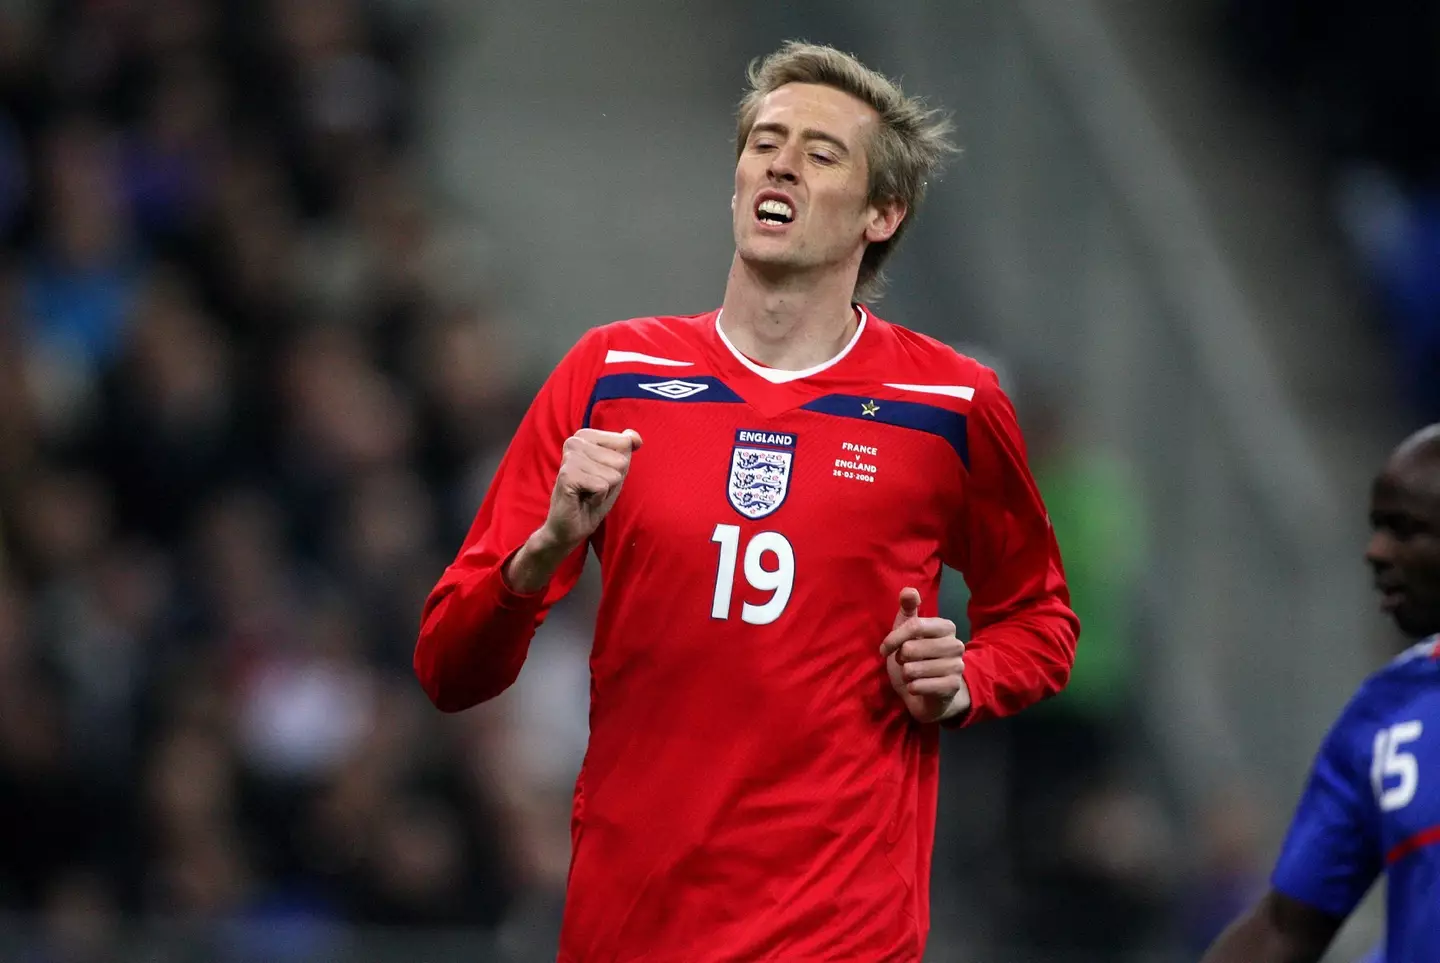 Crouch said booing from England fans affected him and his family.